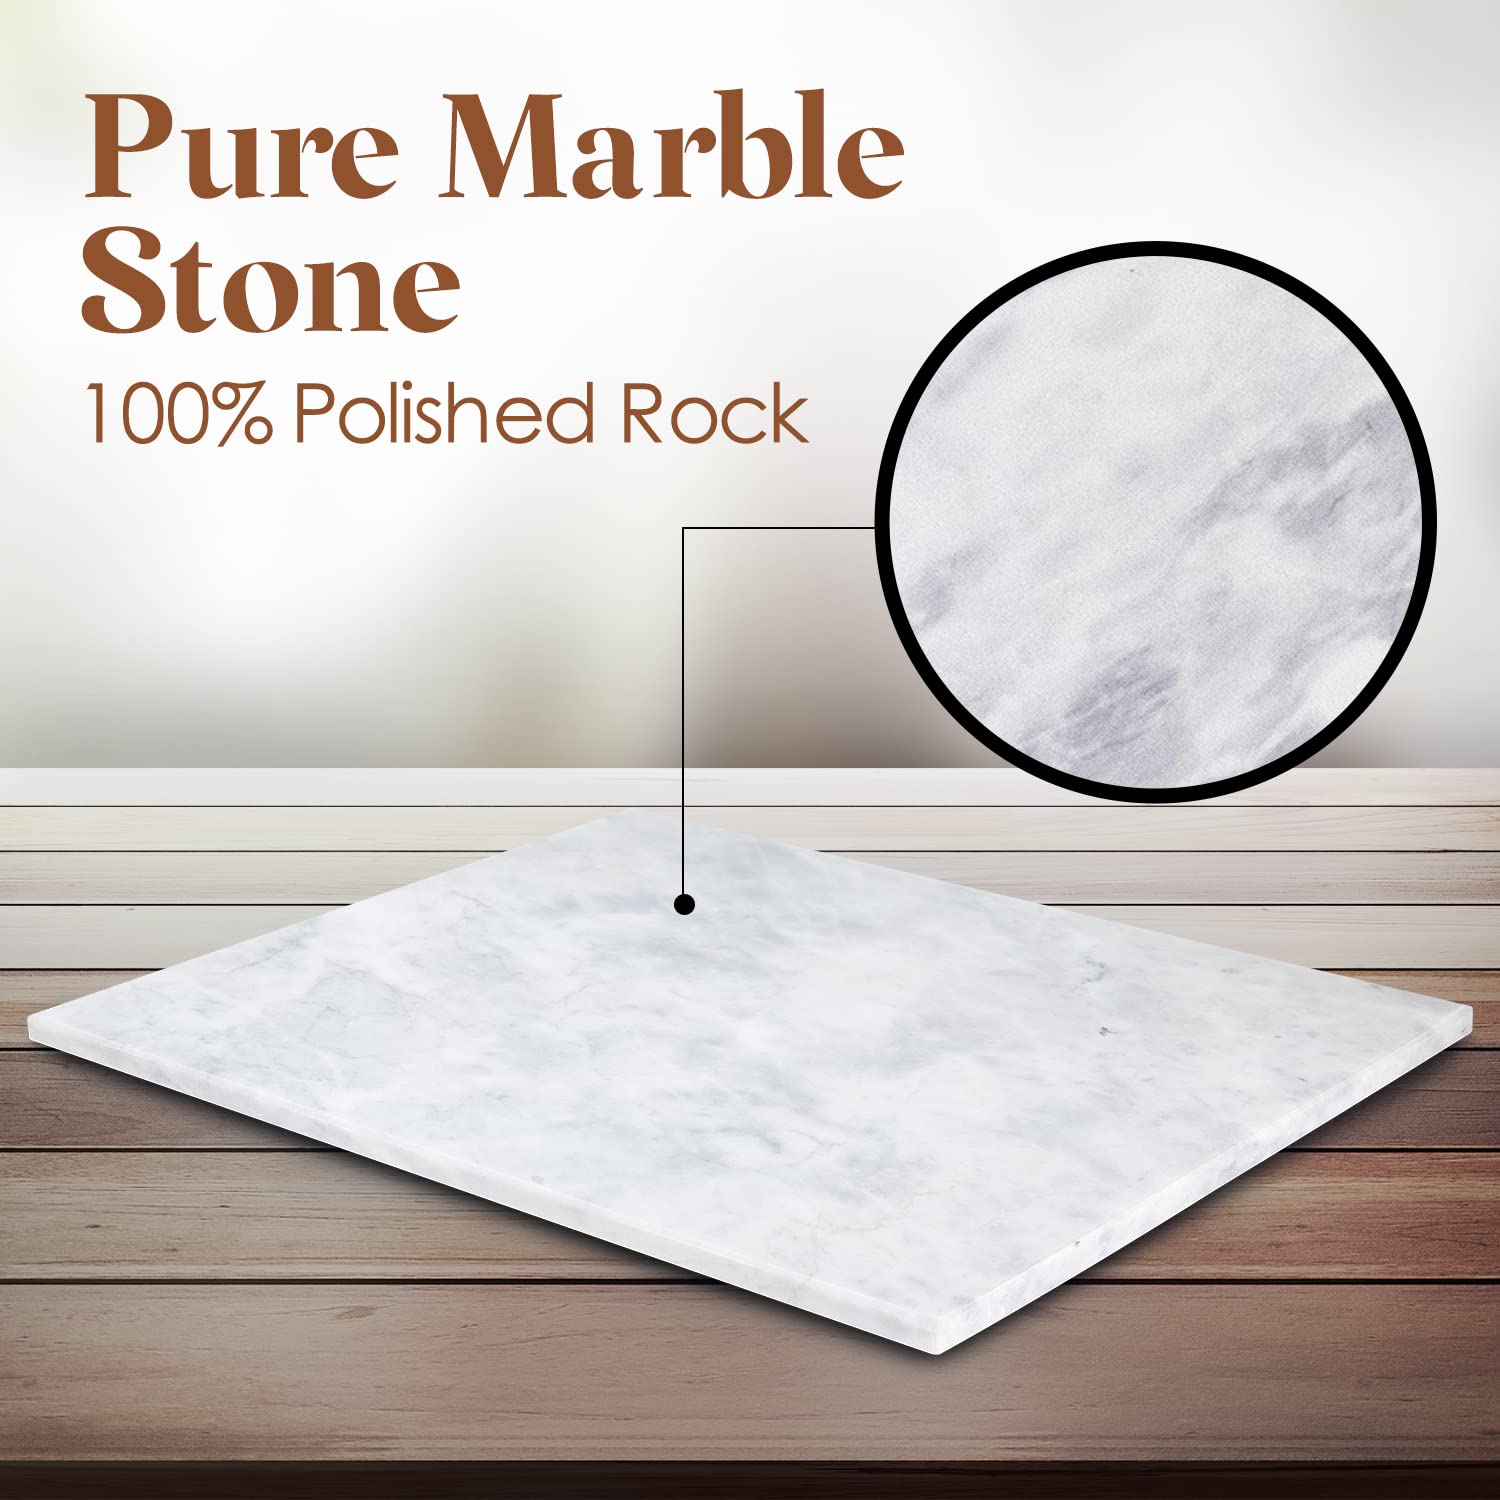 Homeries Marble and Cutting Pastry Board - Marble Serving Tray for Cheese, Pastries, Bread - Large White Fancy Marble Slab for Cake Display Marble  - Good